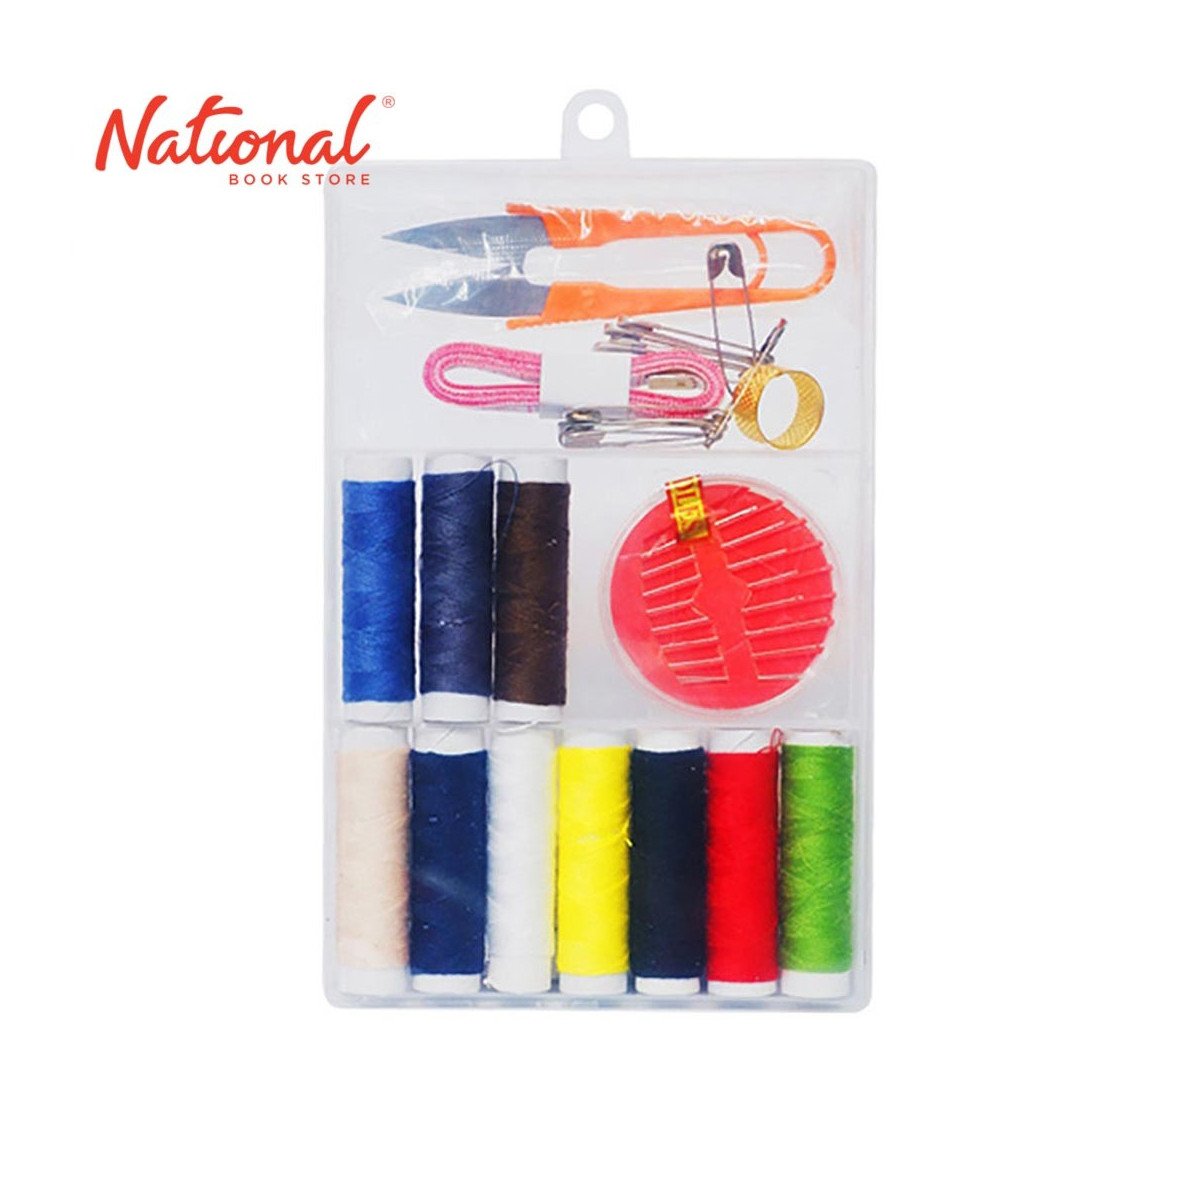 SEWING KIT C9092 PLASTIC CONTAINER 10 THREADS